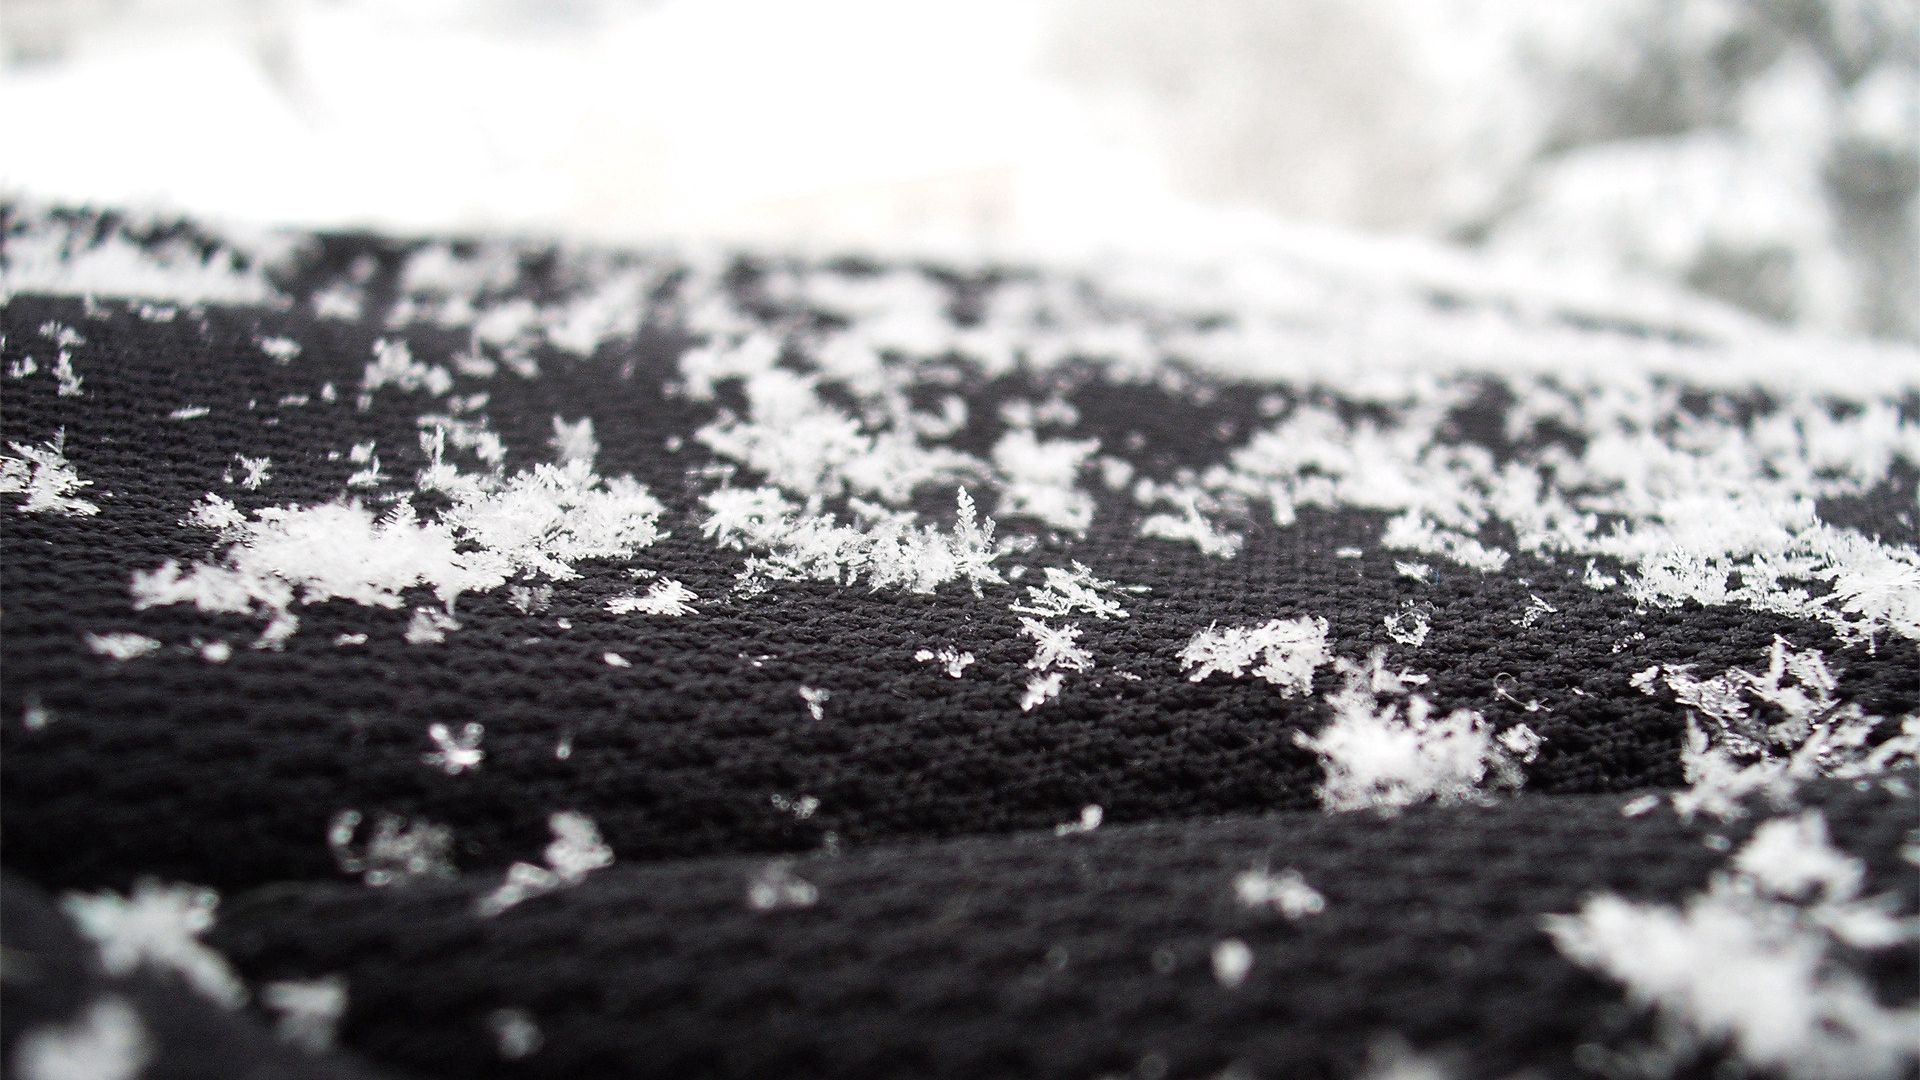 Download wallpaper 1920x1080 snow, surface, flakes, black, white full ...